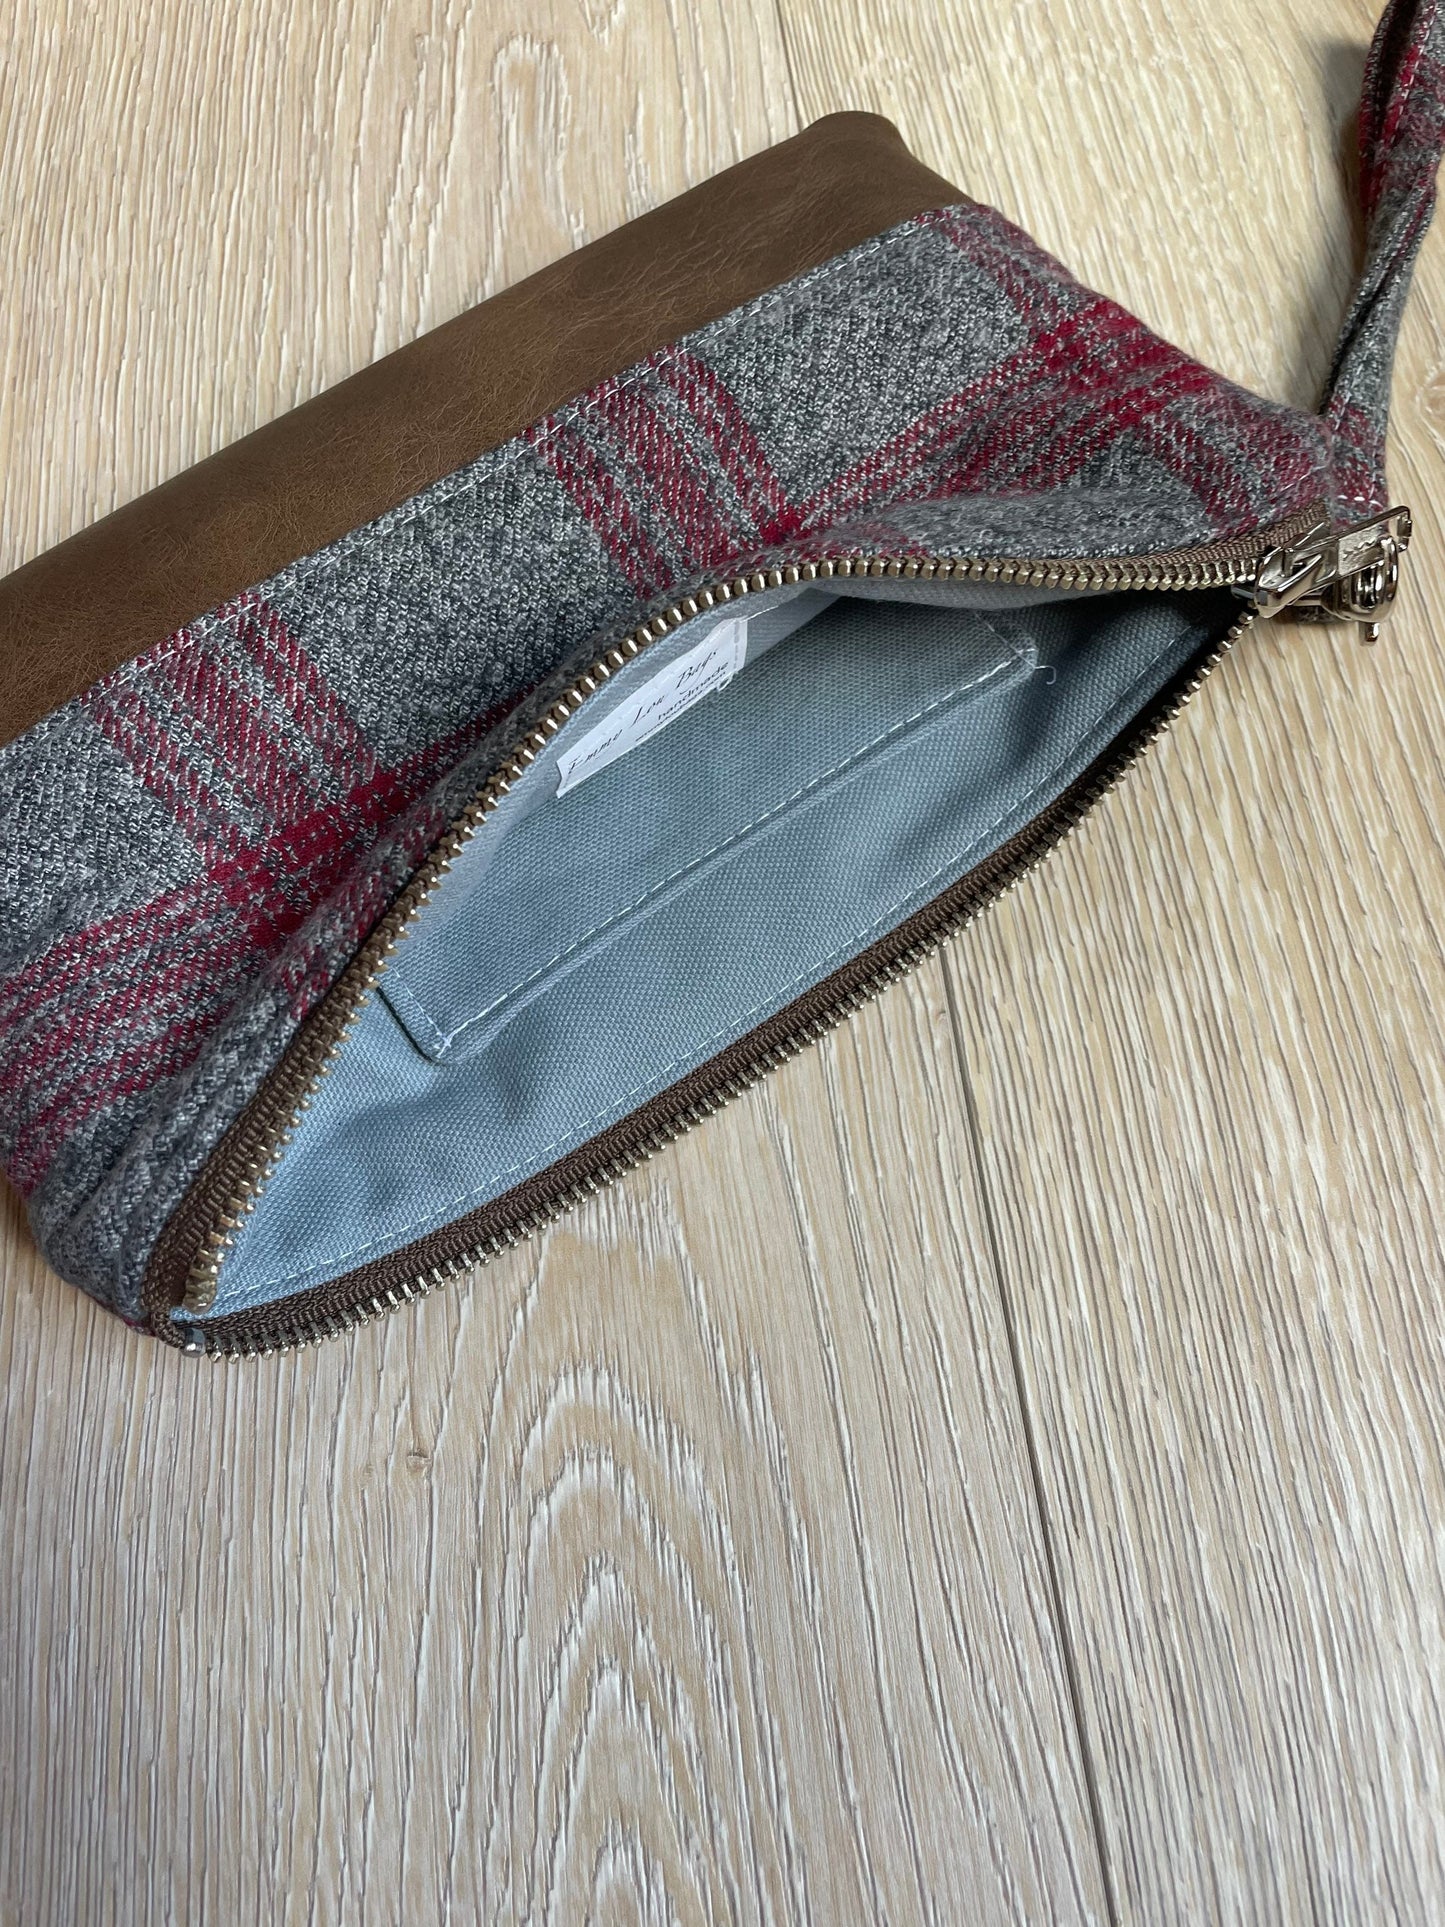 Red and Gray Plaid Flannel Wristlet